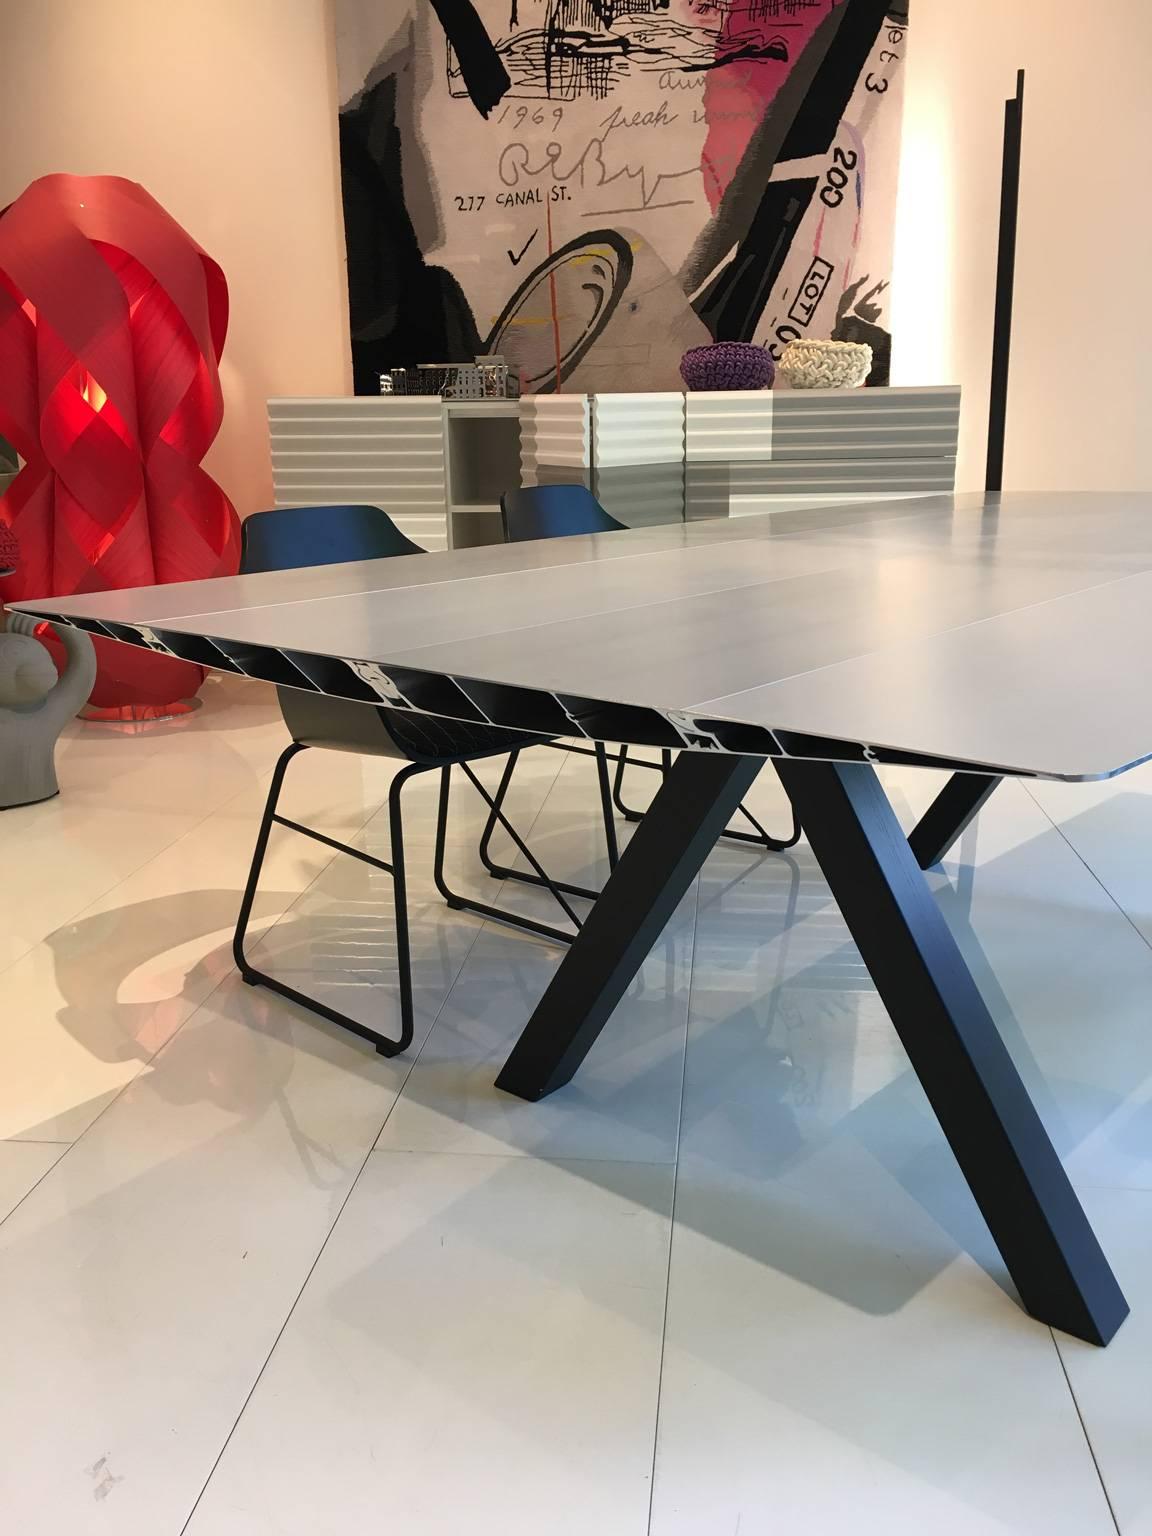 Konstantin Grcic opens the Extrusions collection which he has designed for BD Barcelona design with this table, baptised as Table B. Its name is as simple and technical as the design itself. Grcic has been inspired by classic BD pieces, such as the